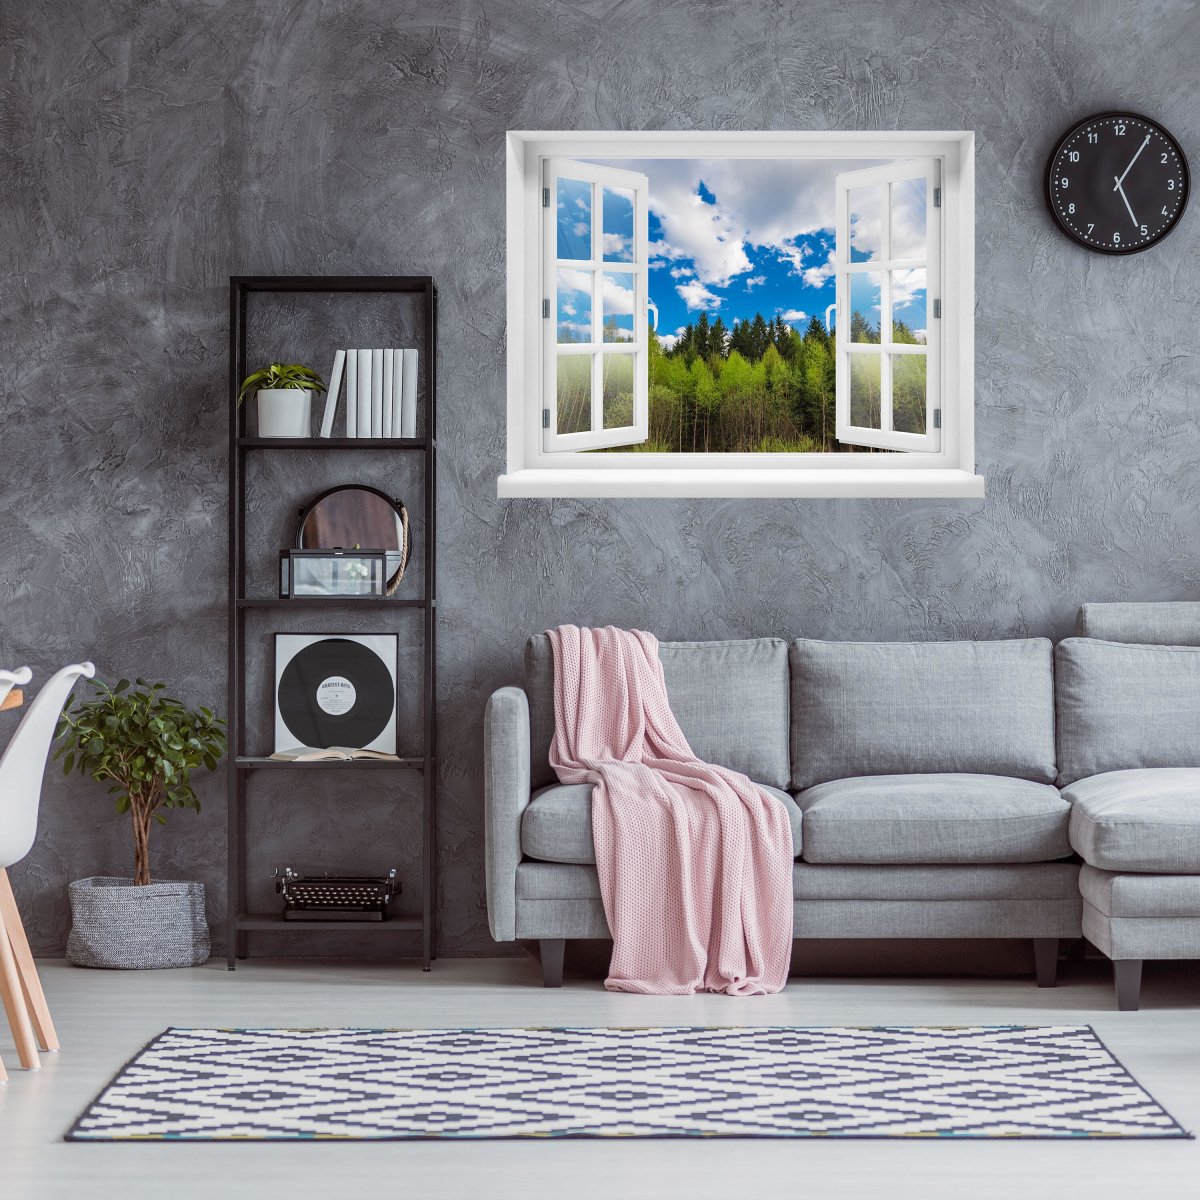 3D wall sticker view of the forest, sky, clouds, trees - wall decal M1305